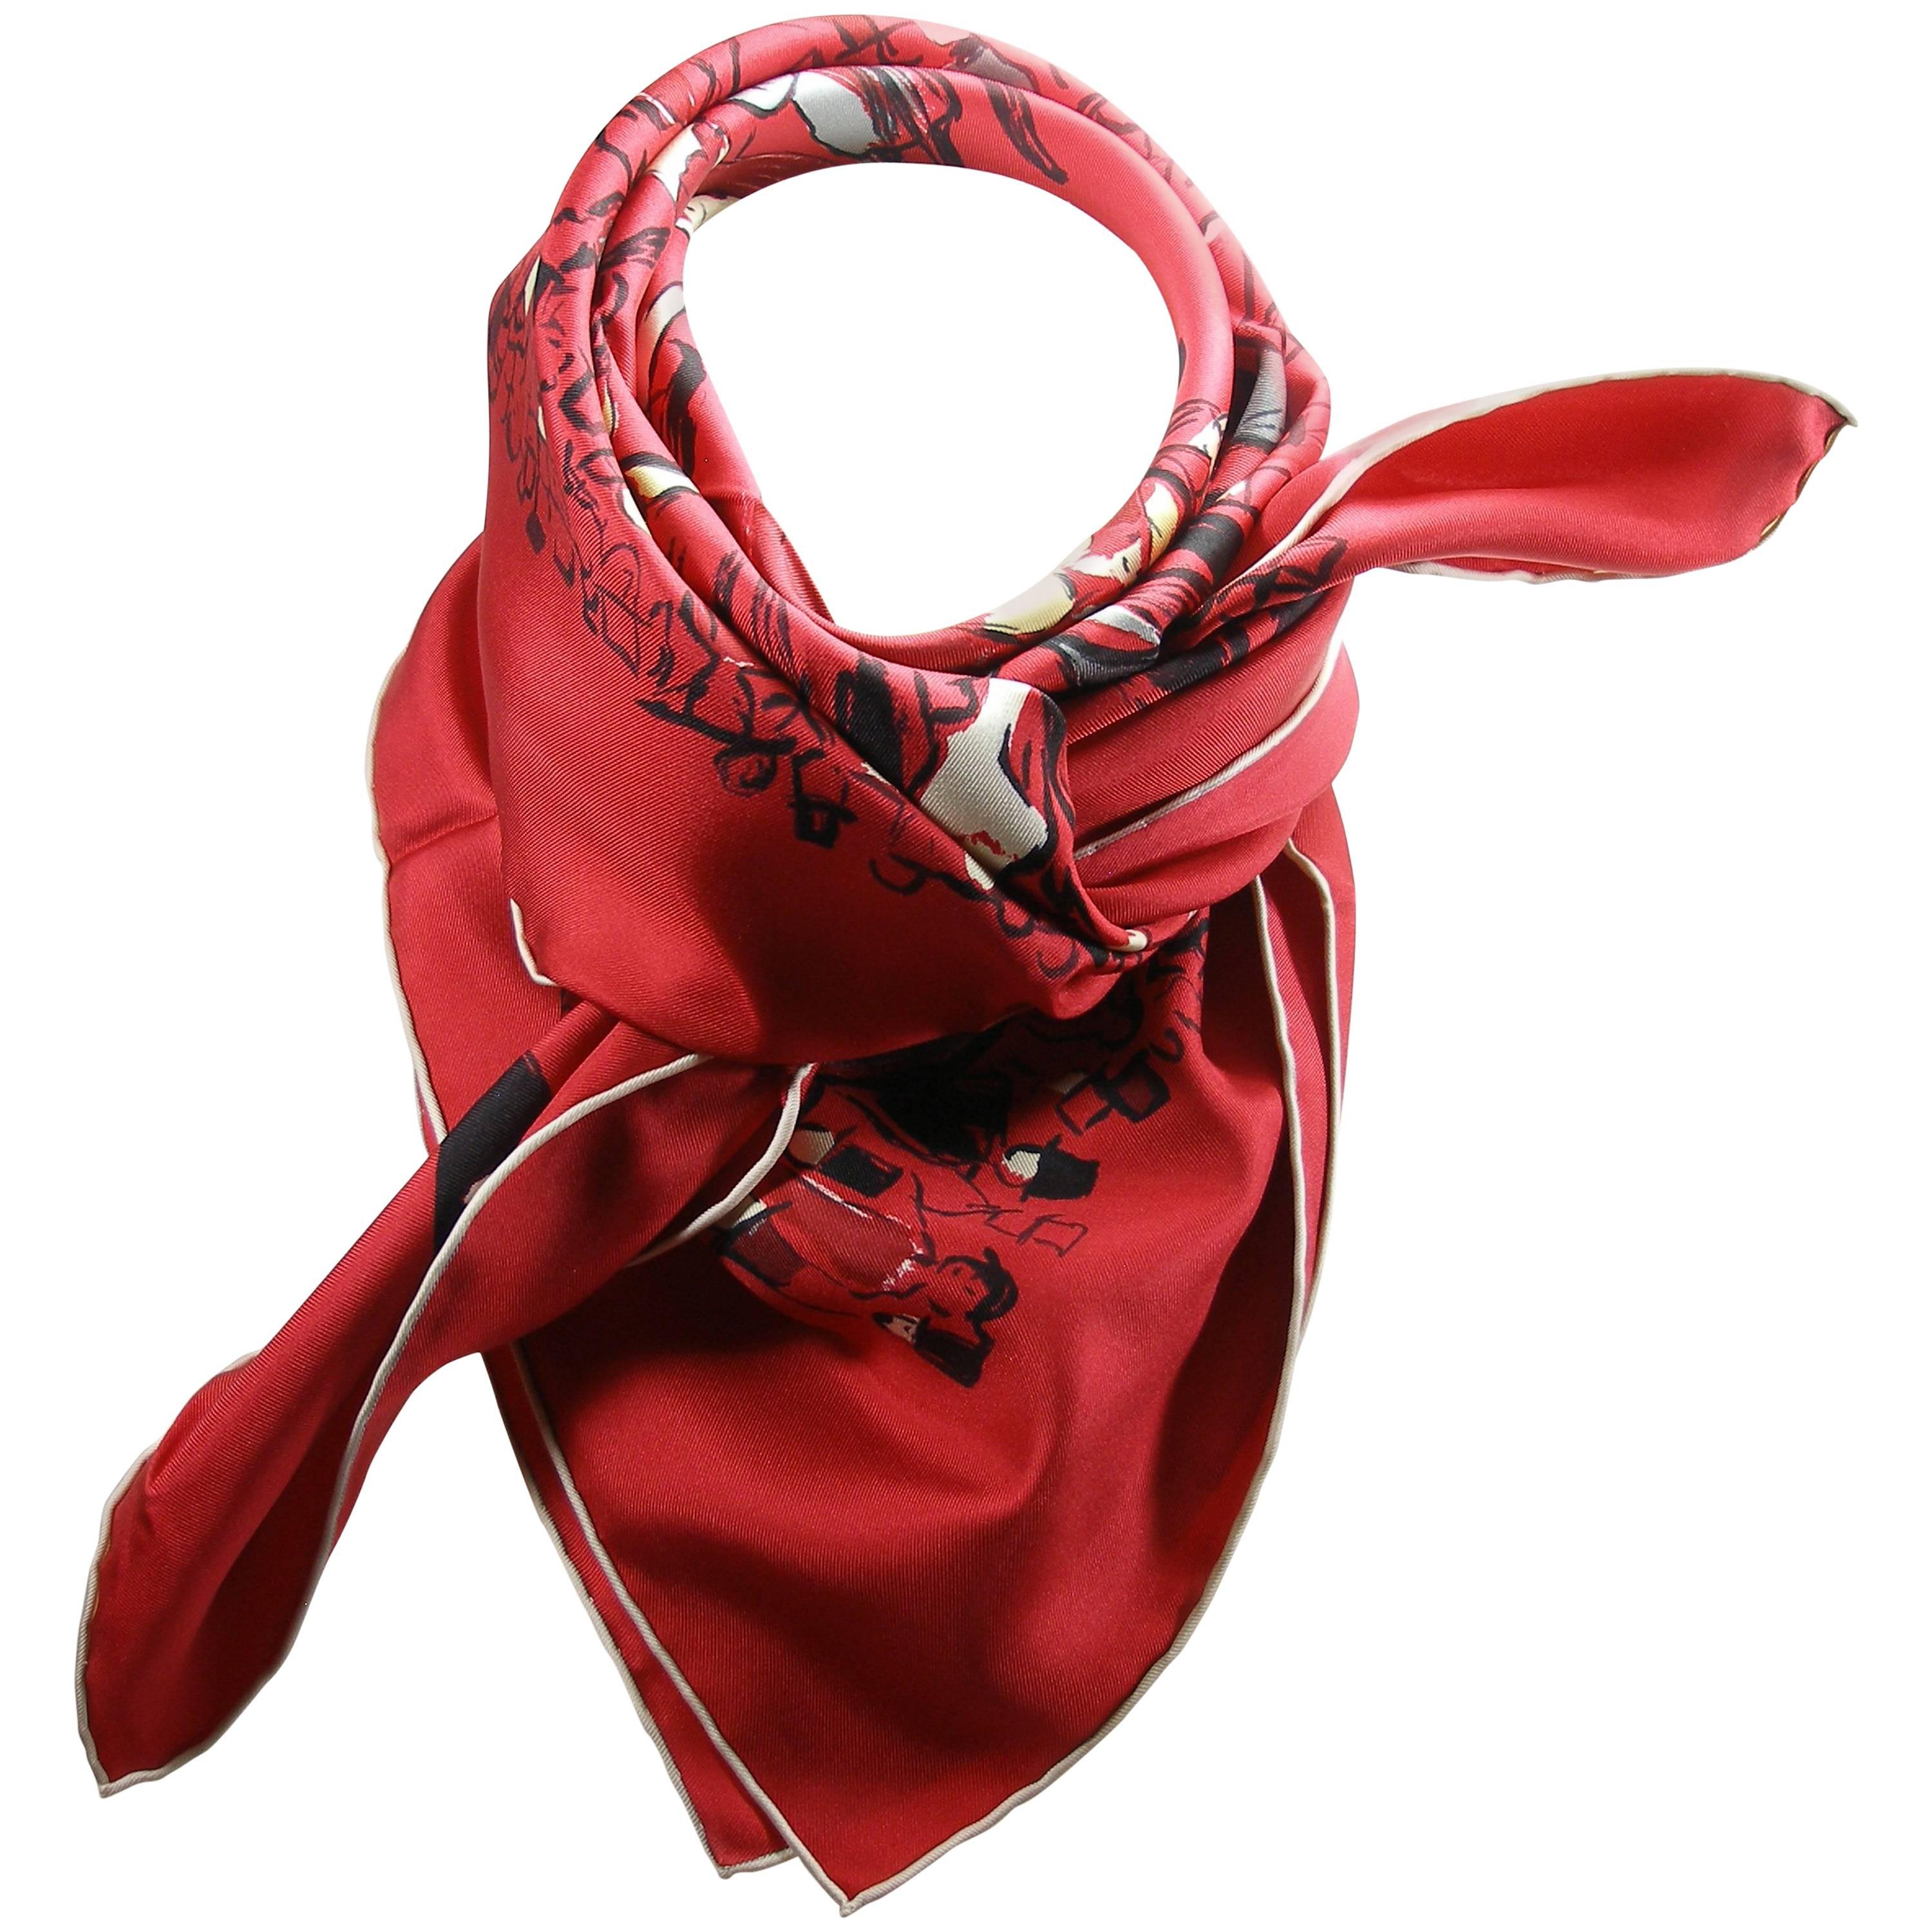  Hermès Made in France Paddock Red Scarf silk 90 cm Edition 2015 / Brand New